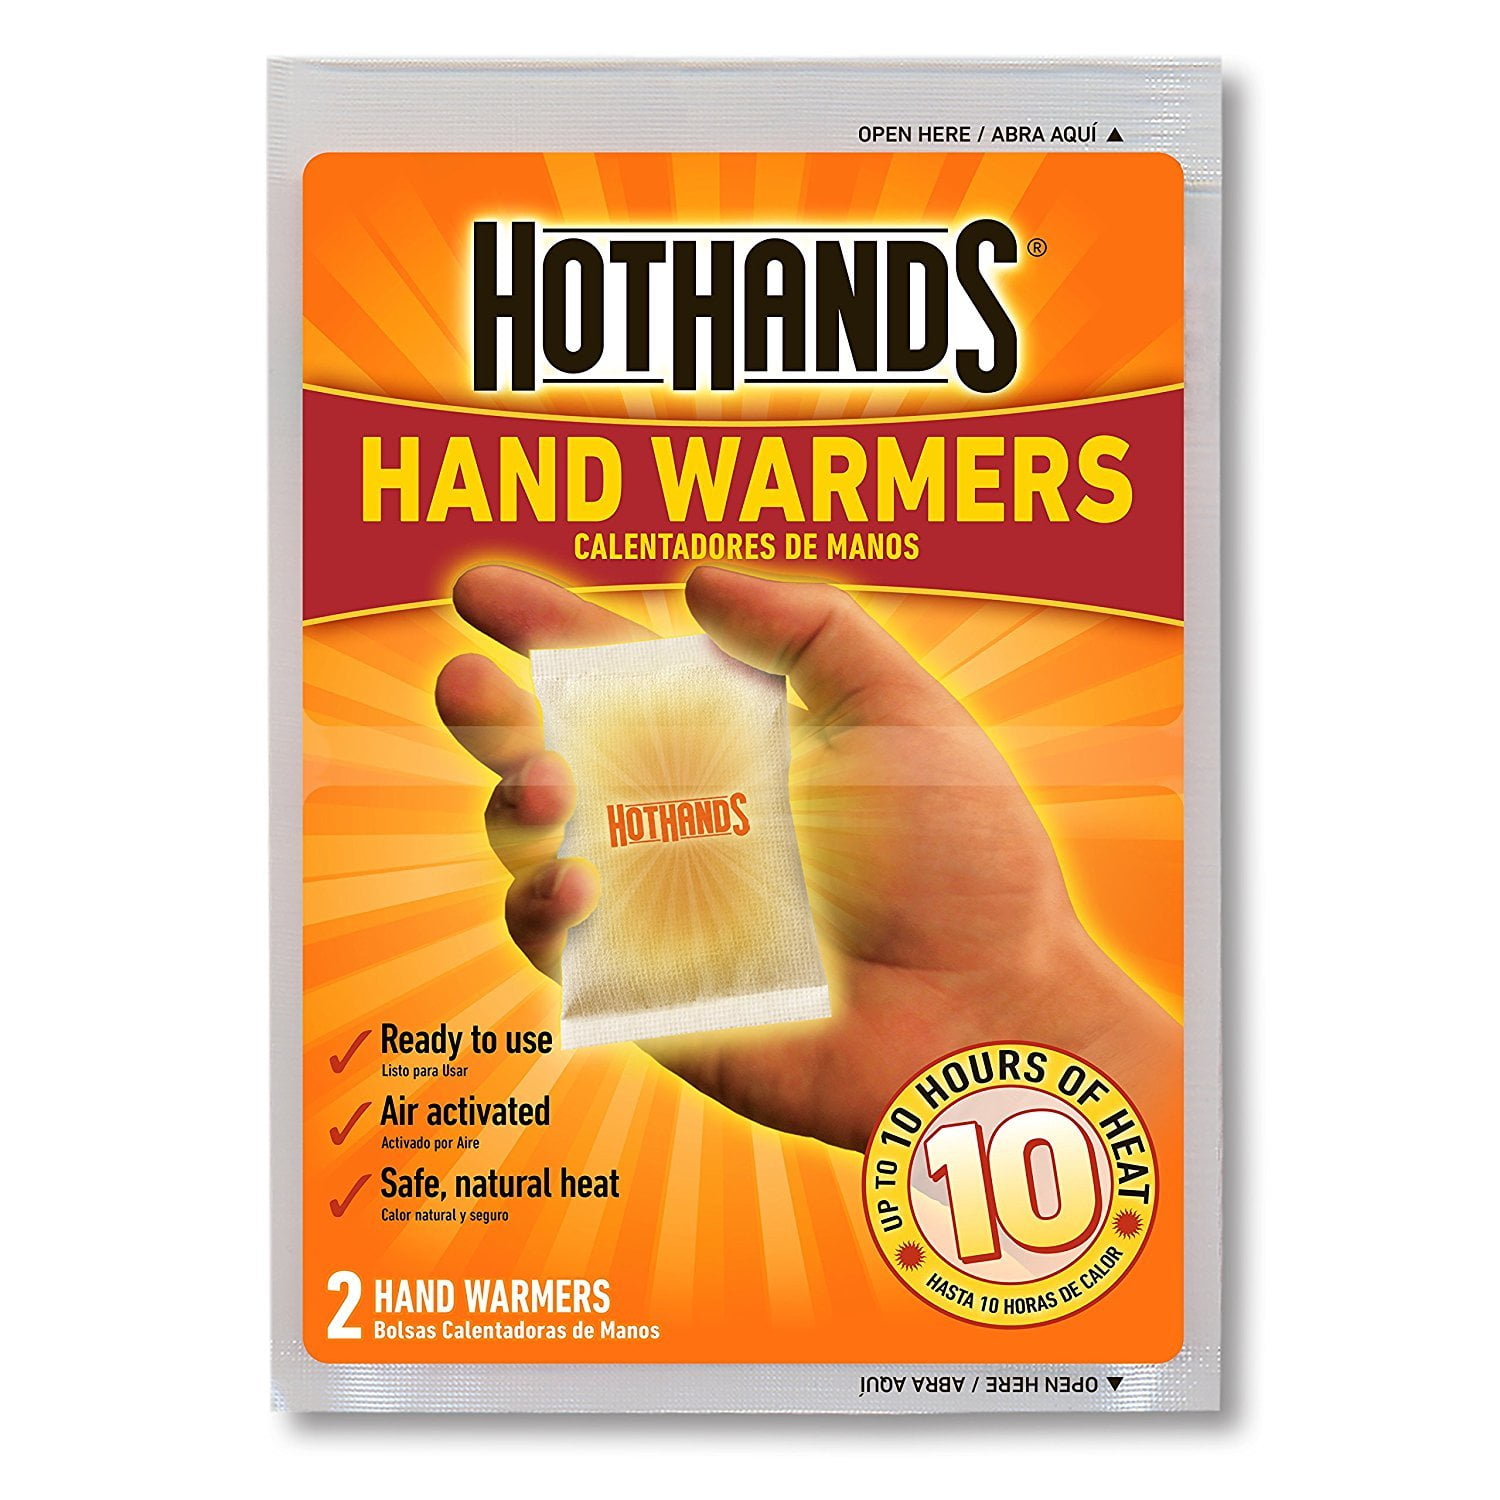 Little Hotties Hand Warmers 10 Pairs 8 Hours Pure Heat Safe Natural Odorless for sale online 